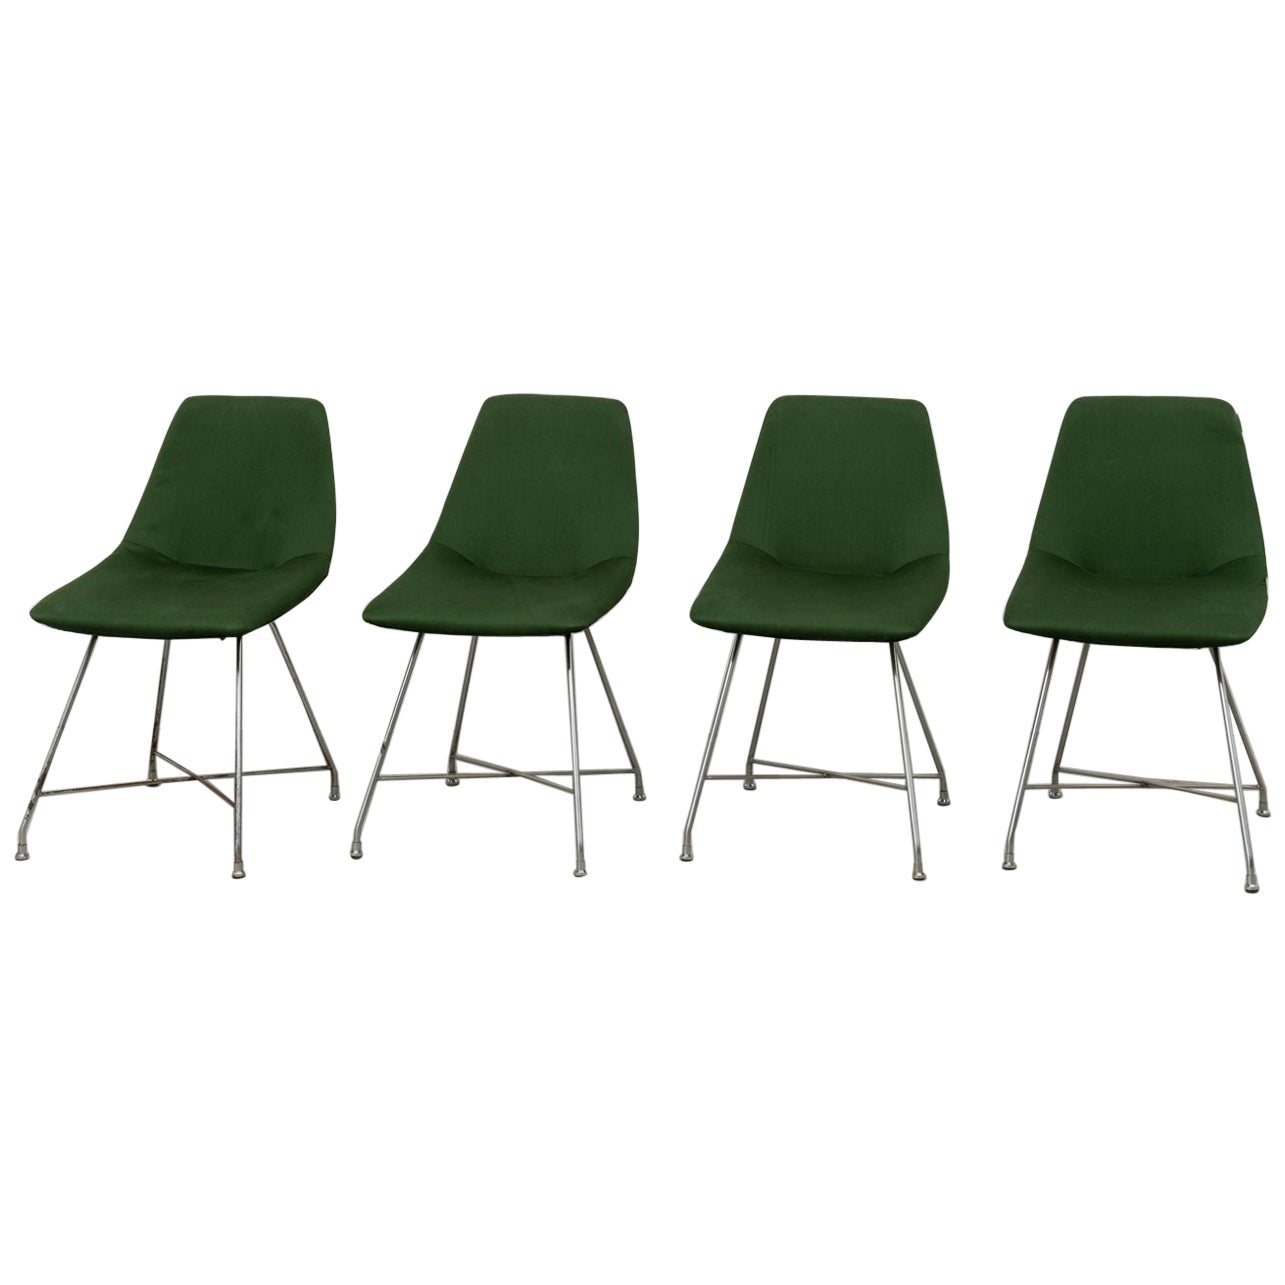 Augusto Bozzi Set of 4 "Aster" Green and Chrome Chairs for Saporiti, 1950s For Sale